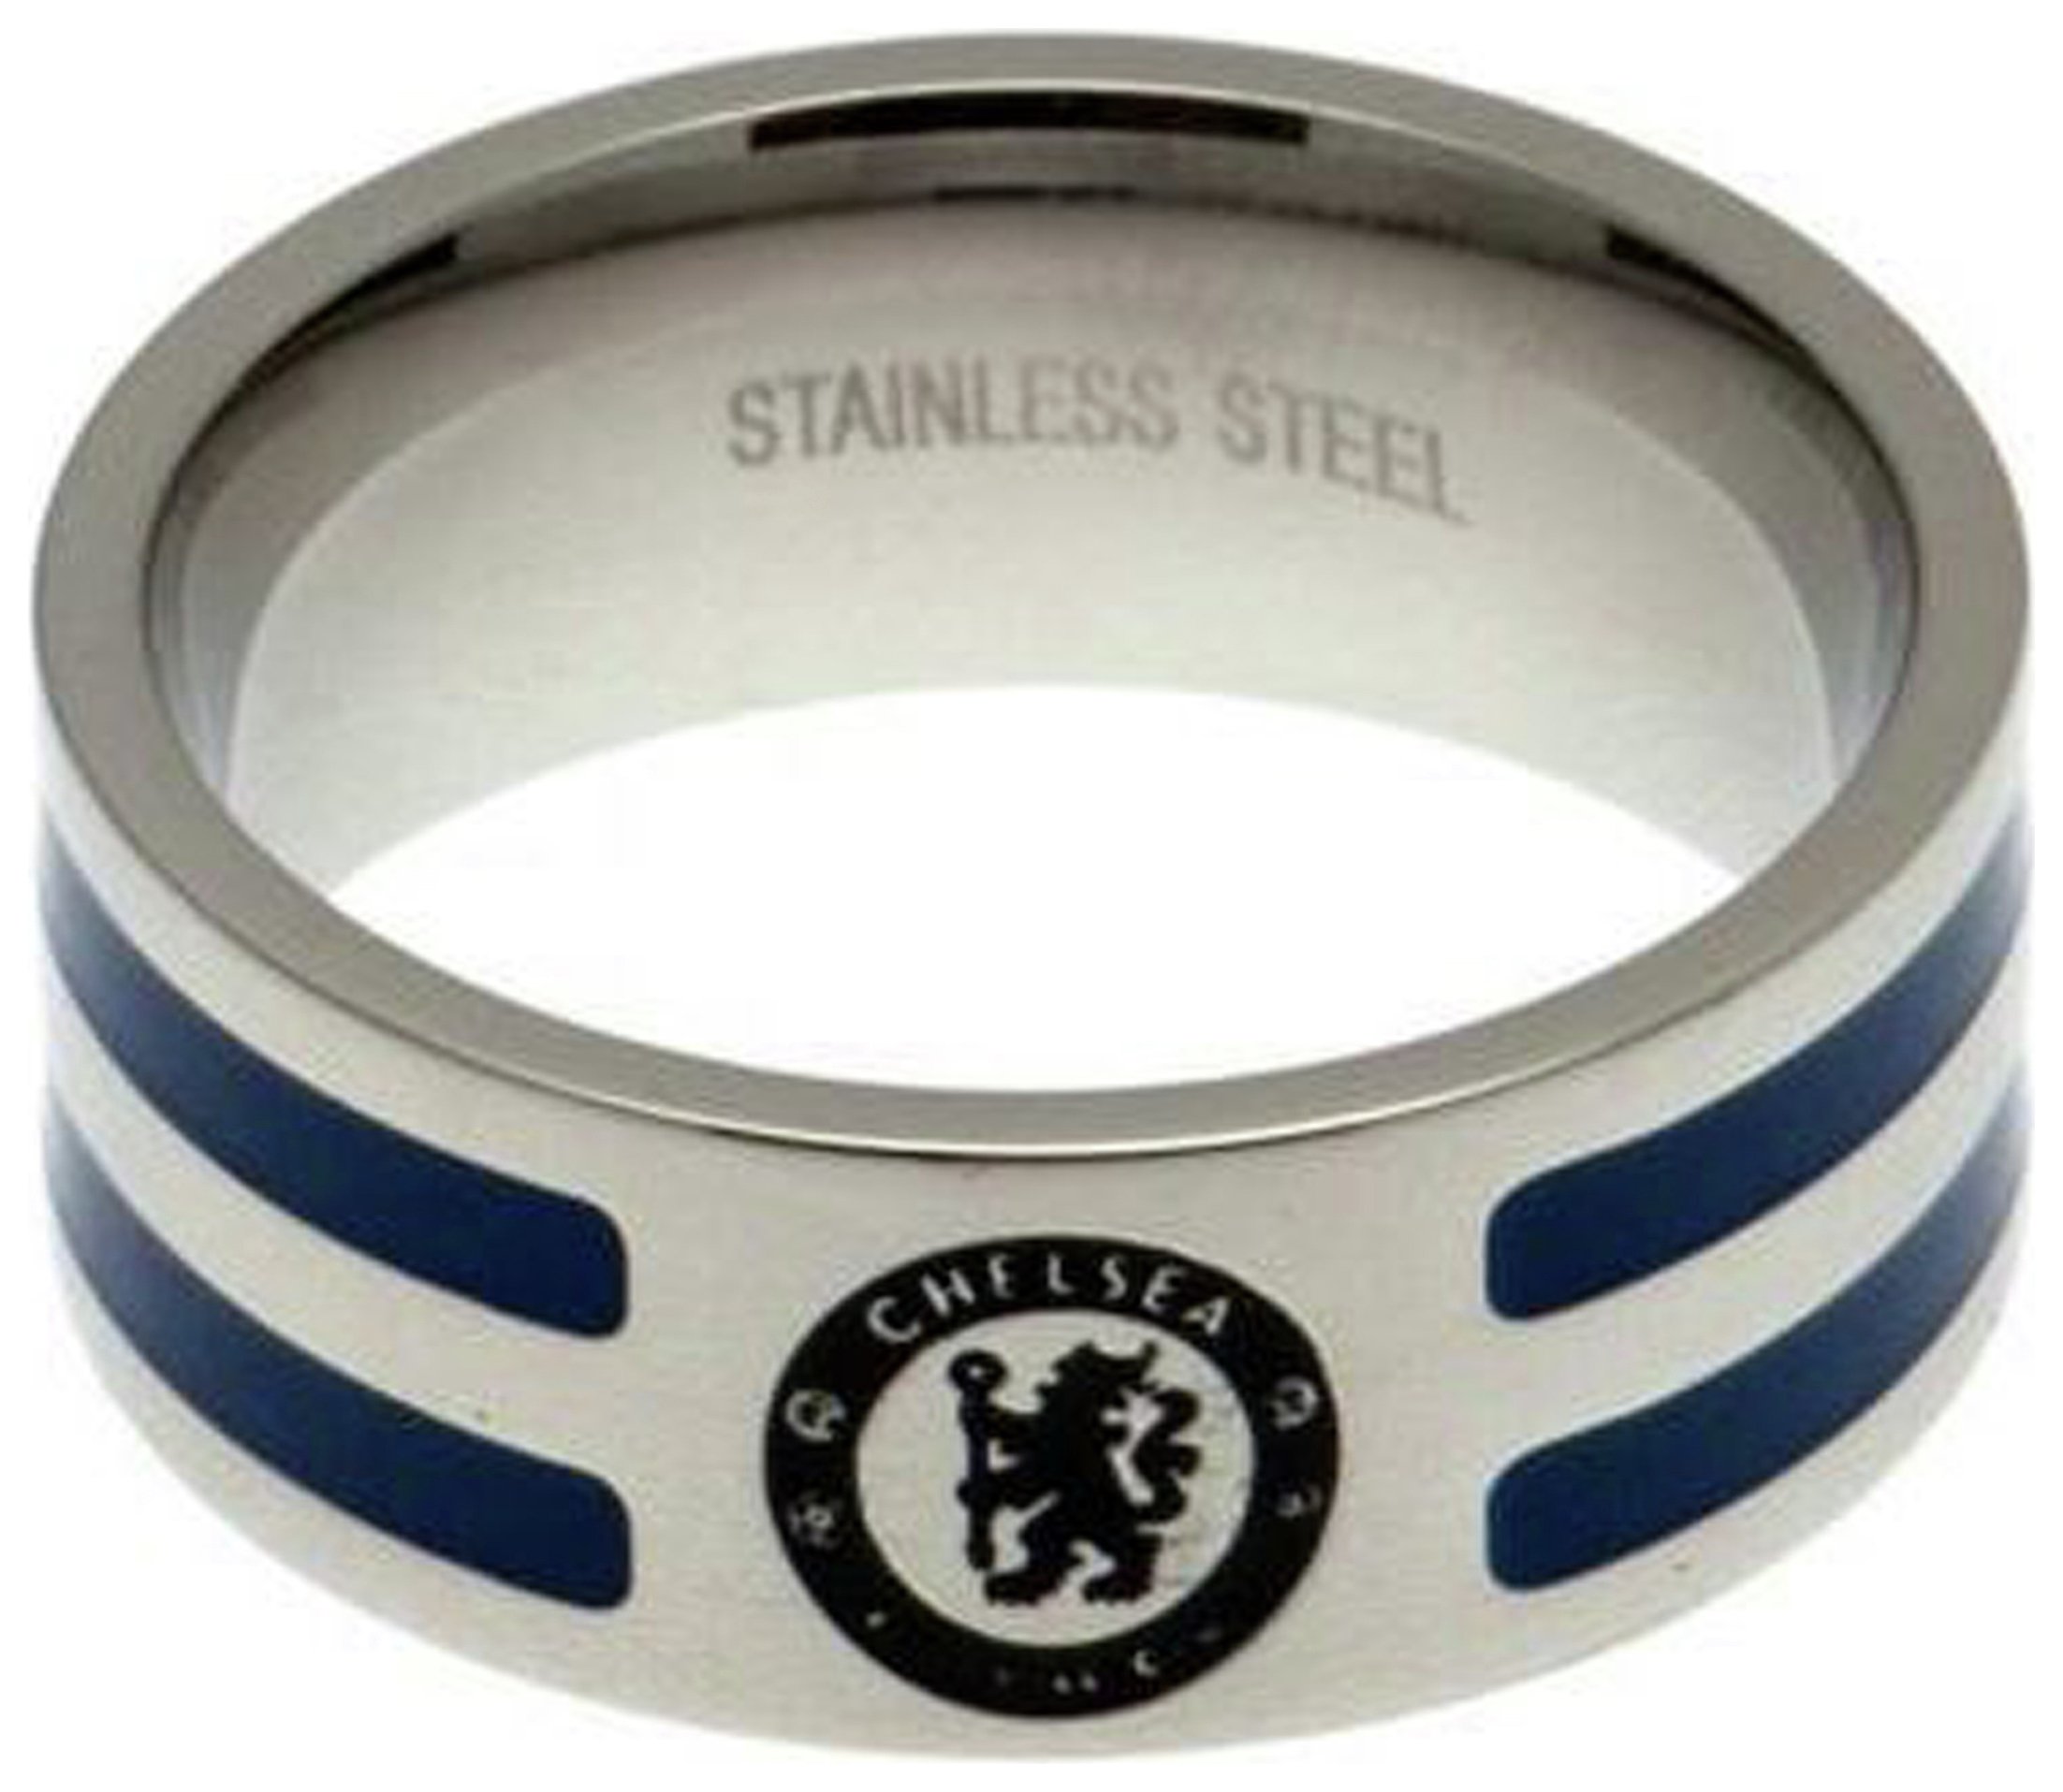 Stainless Steel Chelsea Striped Ring - Size R.